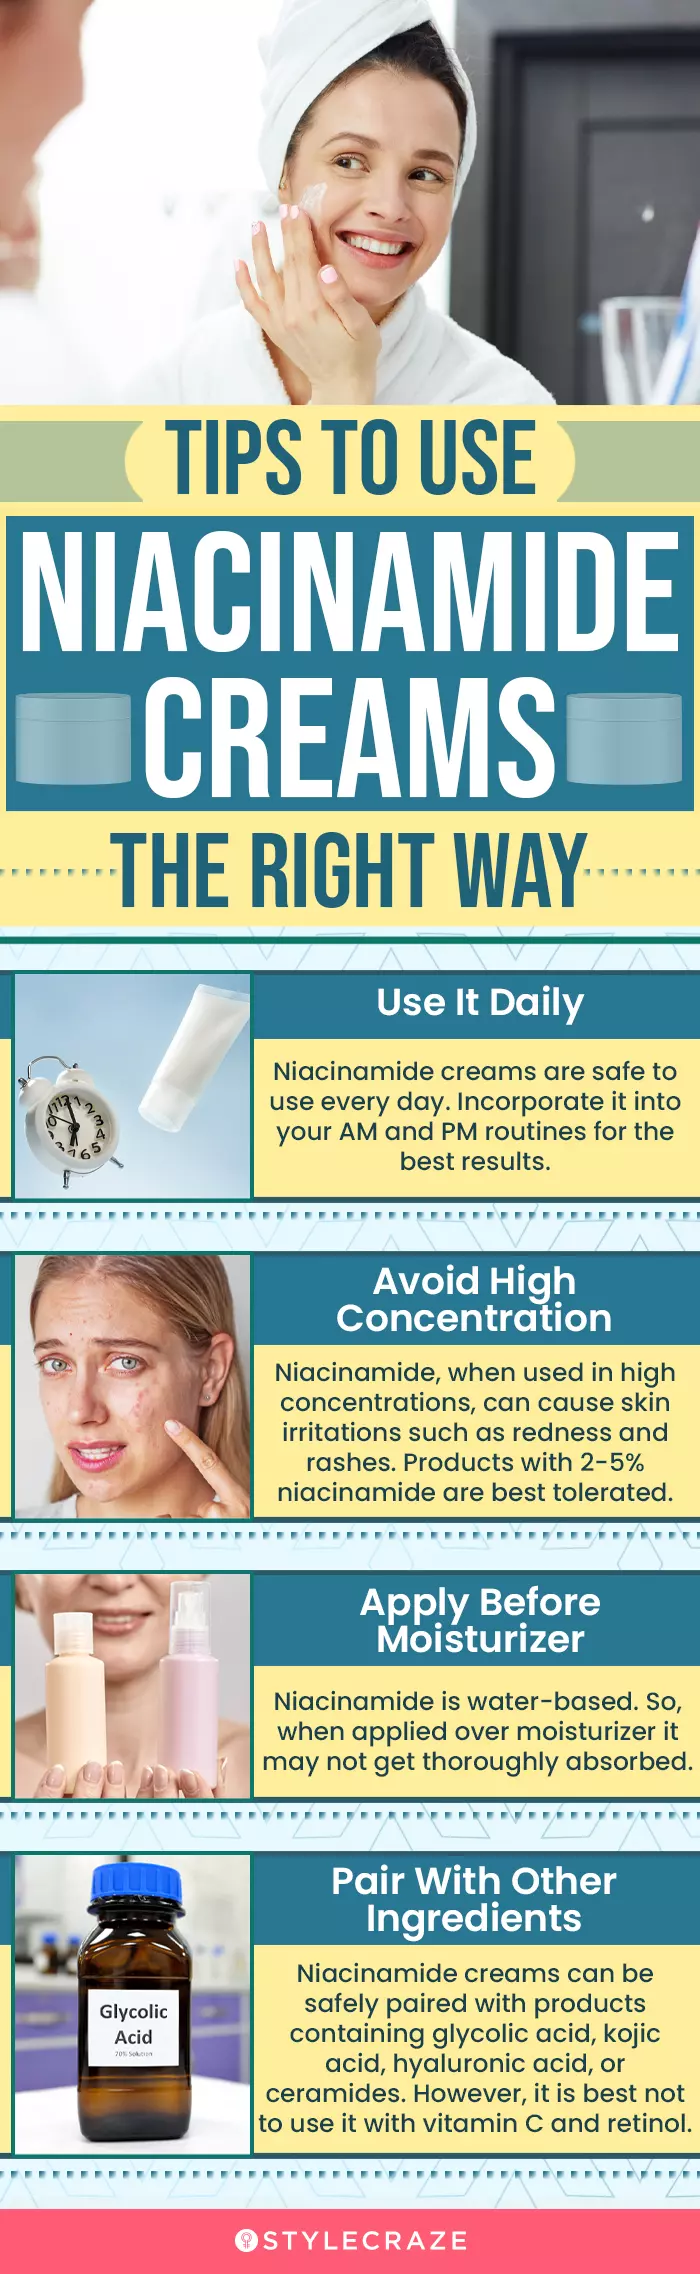 Tips To Use Niacinamide Cream The Right Way (infographic)